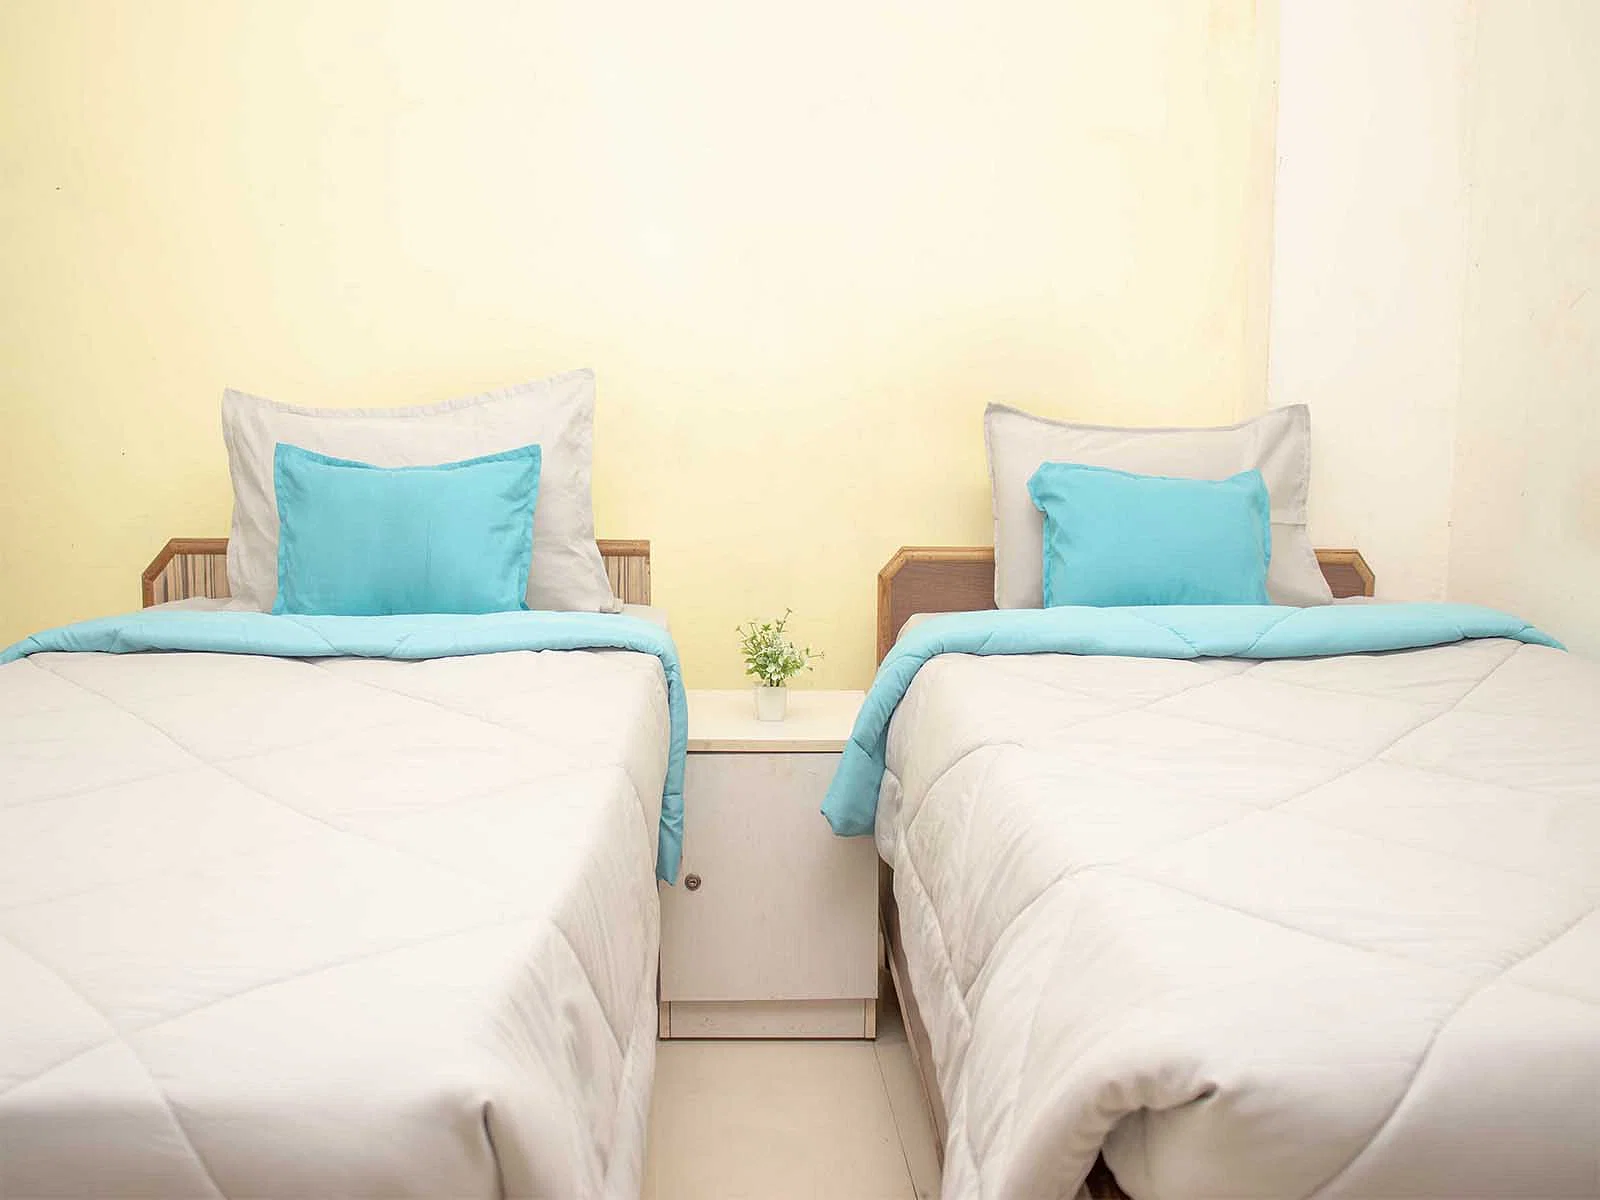 pgs in Sector 27 with Daily housekeeping facilities and free Wi-Fi-Zolo Kites